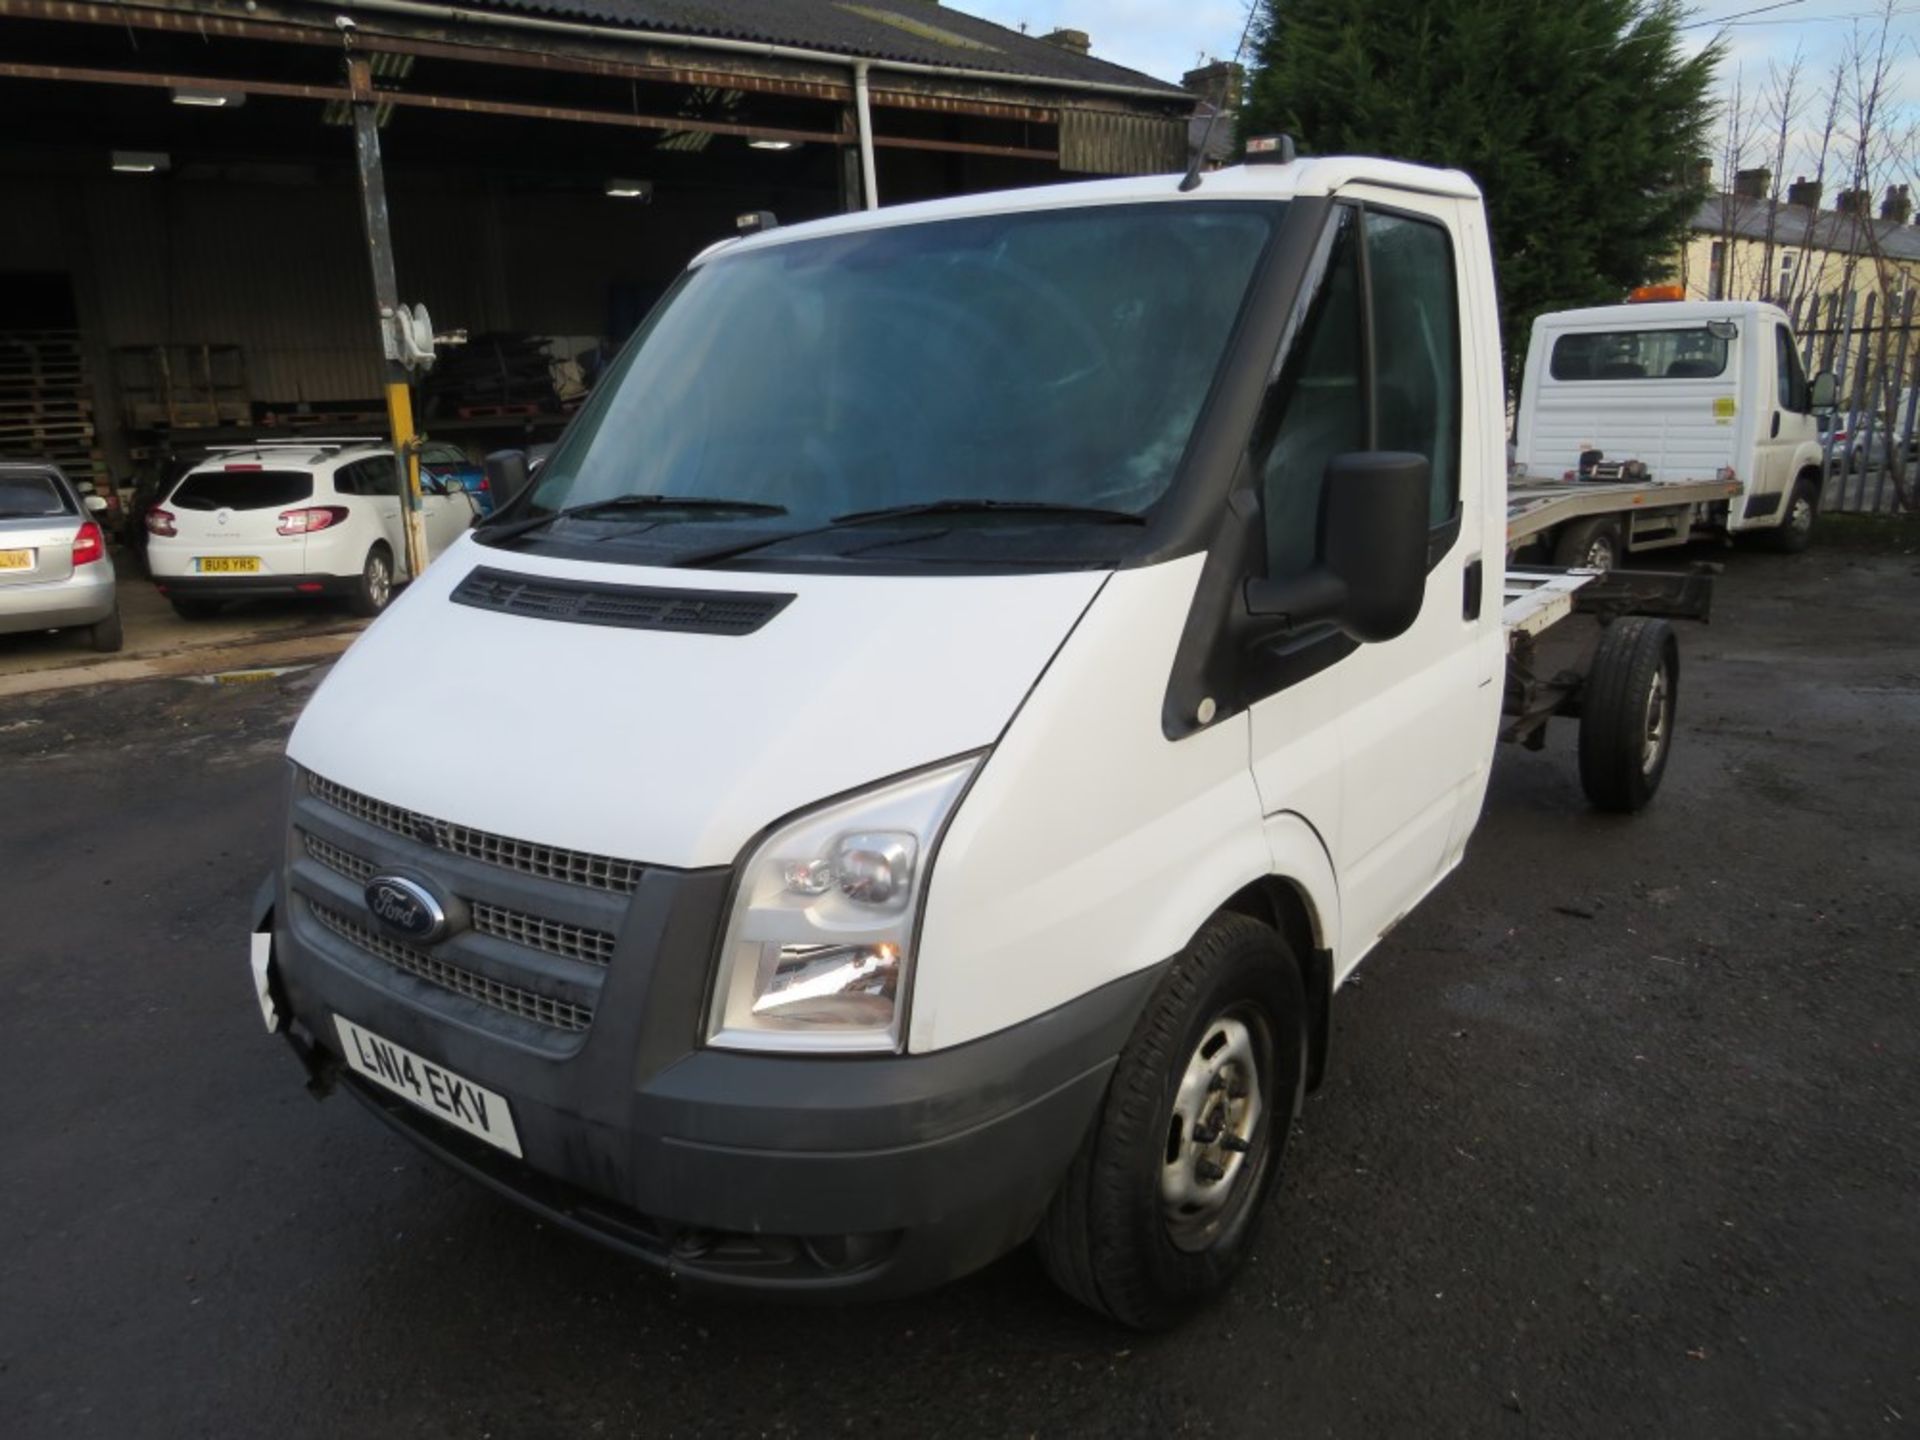 14 reg FORD TRANSIT 100 T350 RWD CHASSIS CAB, 1ST REG 04/14, TEST 04/20, 123084M, V5 HERE, 1 OWNER - Image 2 of 5